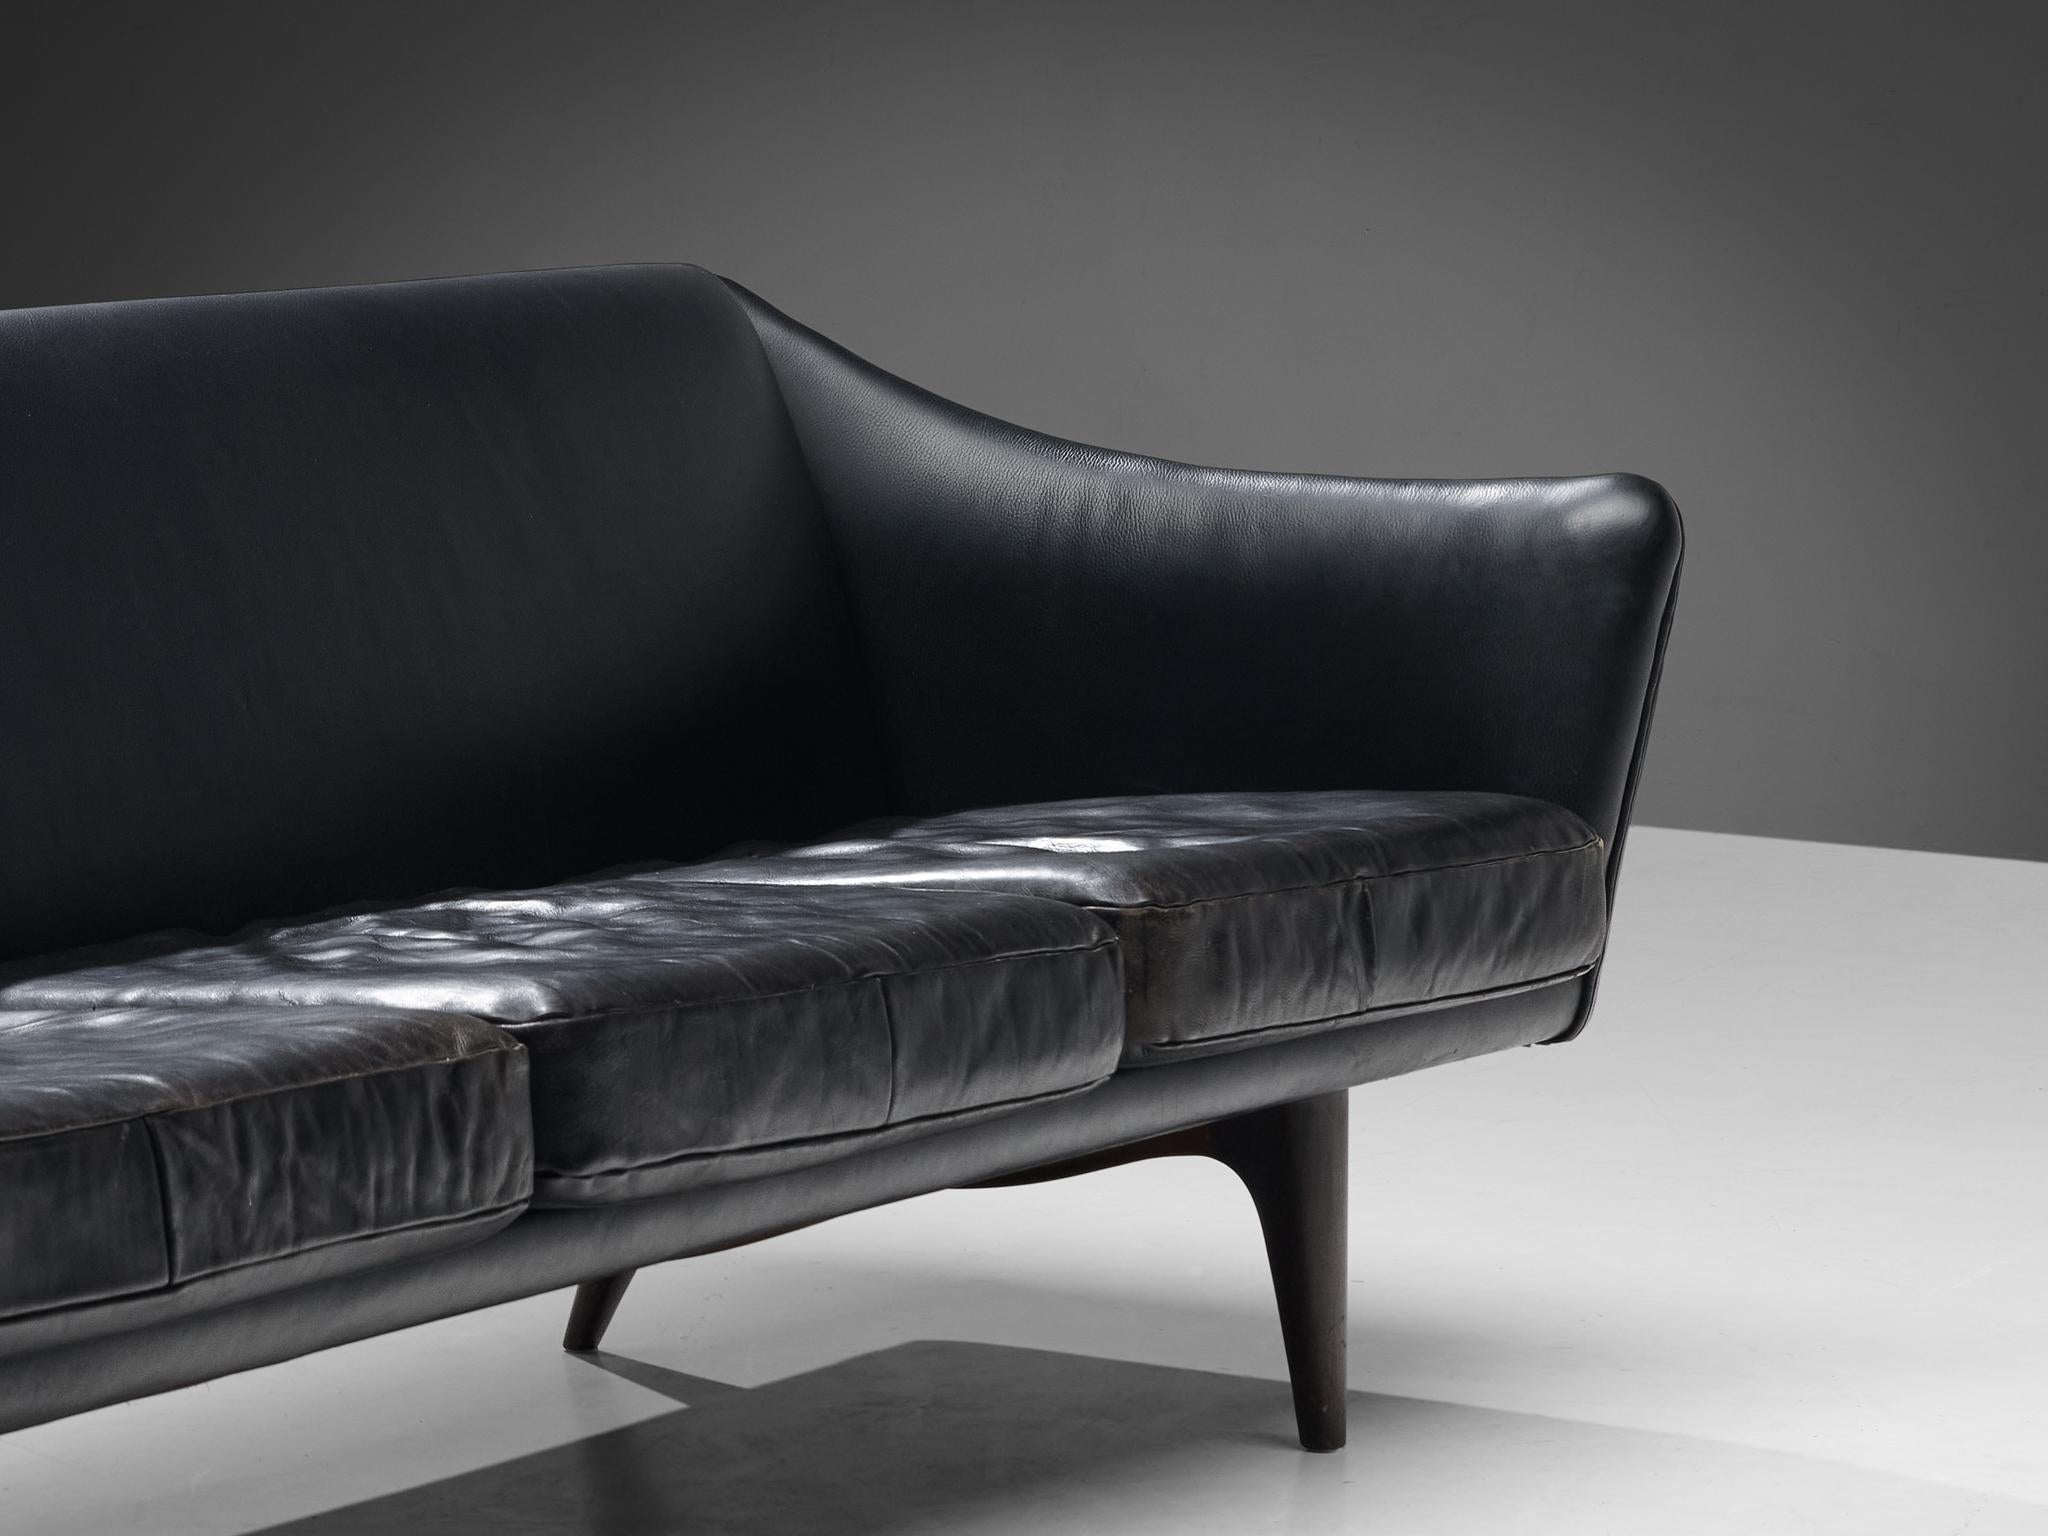 Mid-20th Century Illum Wikkelsø for A. Mikael Laursen & Søn Sofa in Black Leather  For Sale